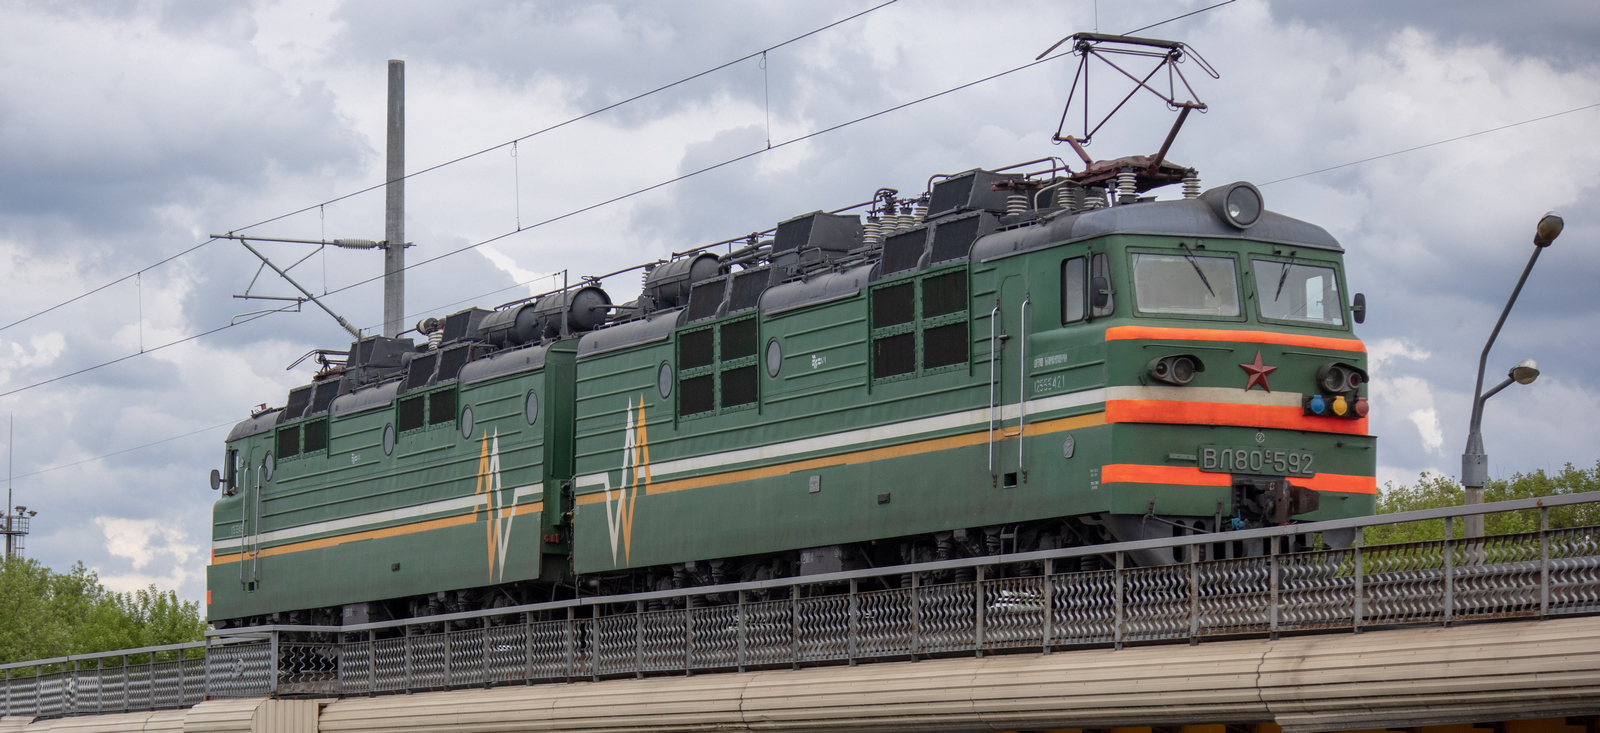 Belarusian ВЛ80<sup>C</sup>-592 in May 2021 in Minsk